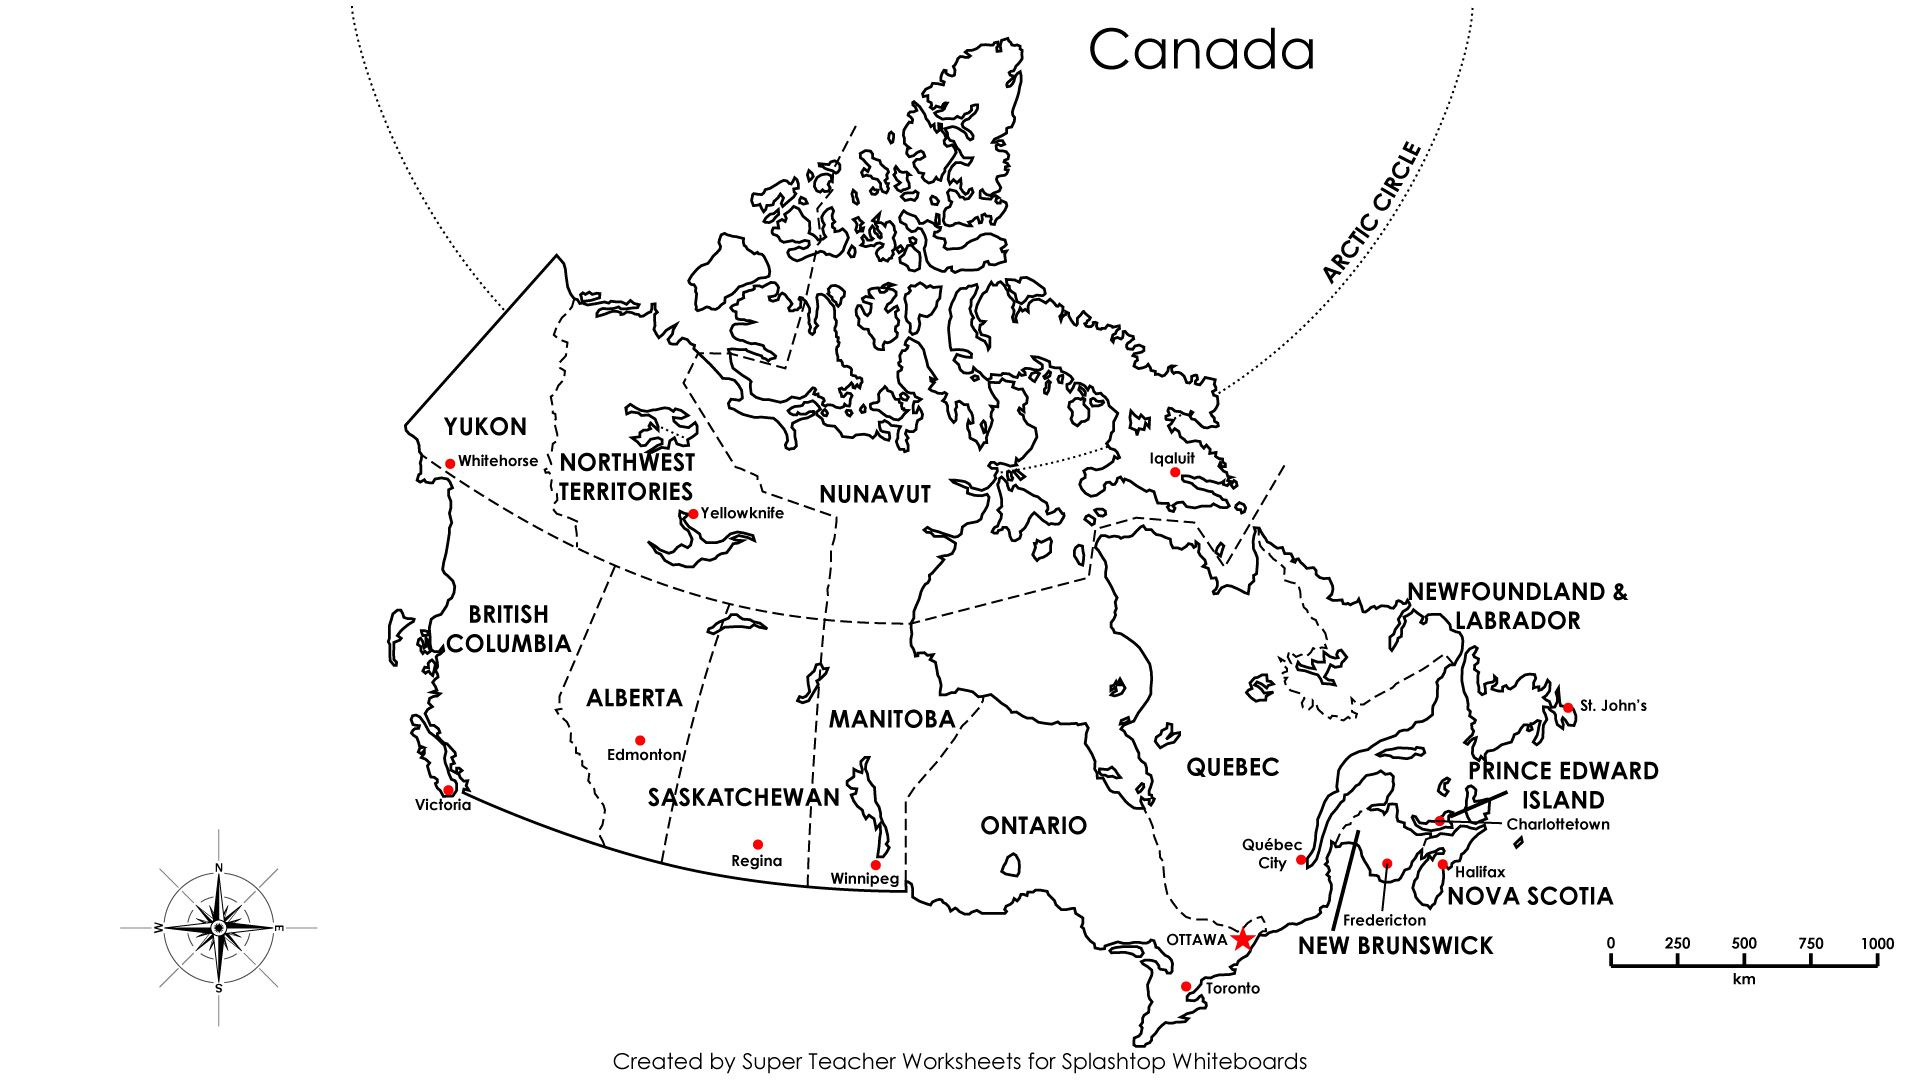 Canada Map With Capitals Labeled Super Teacher Worksheets Canada 